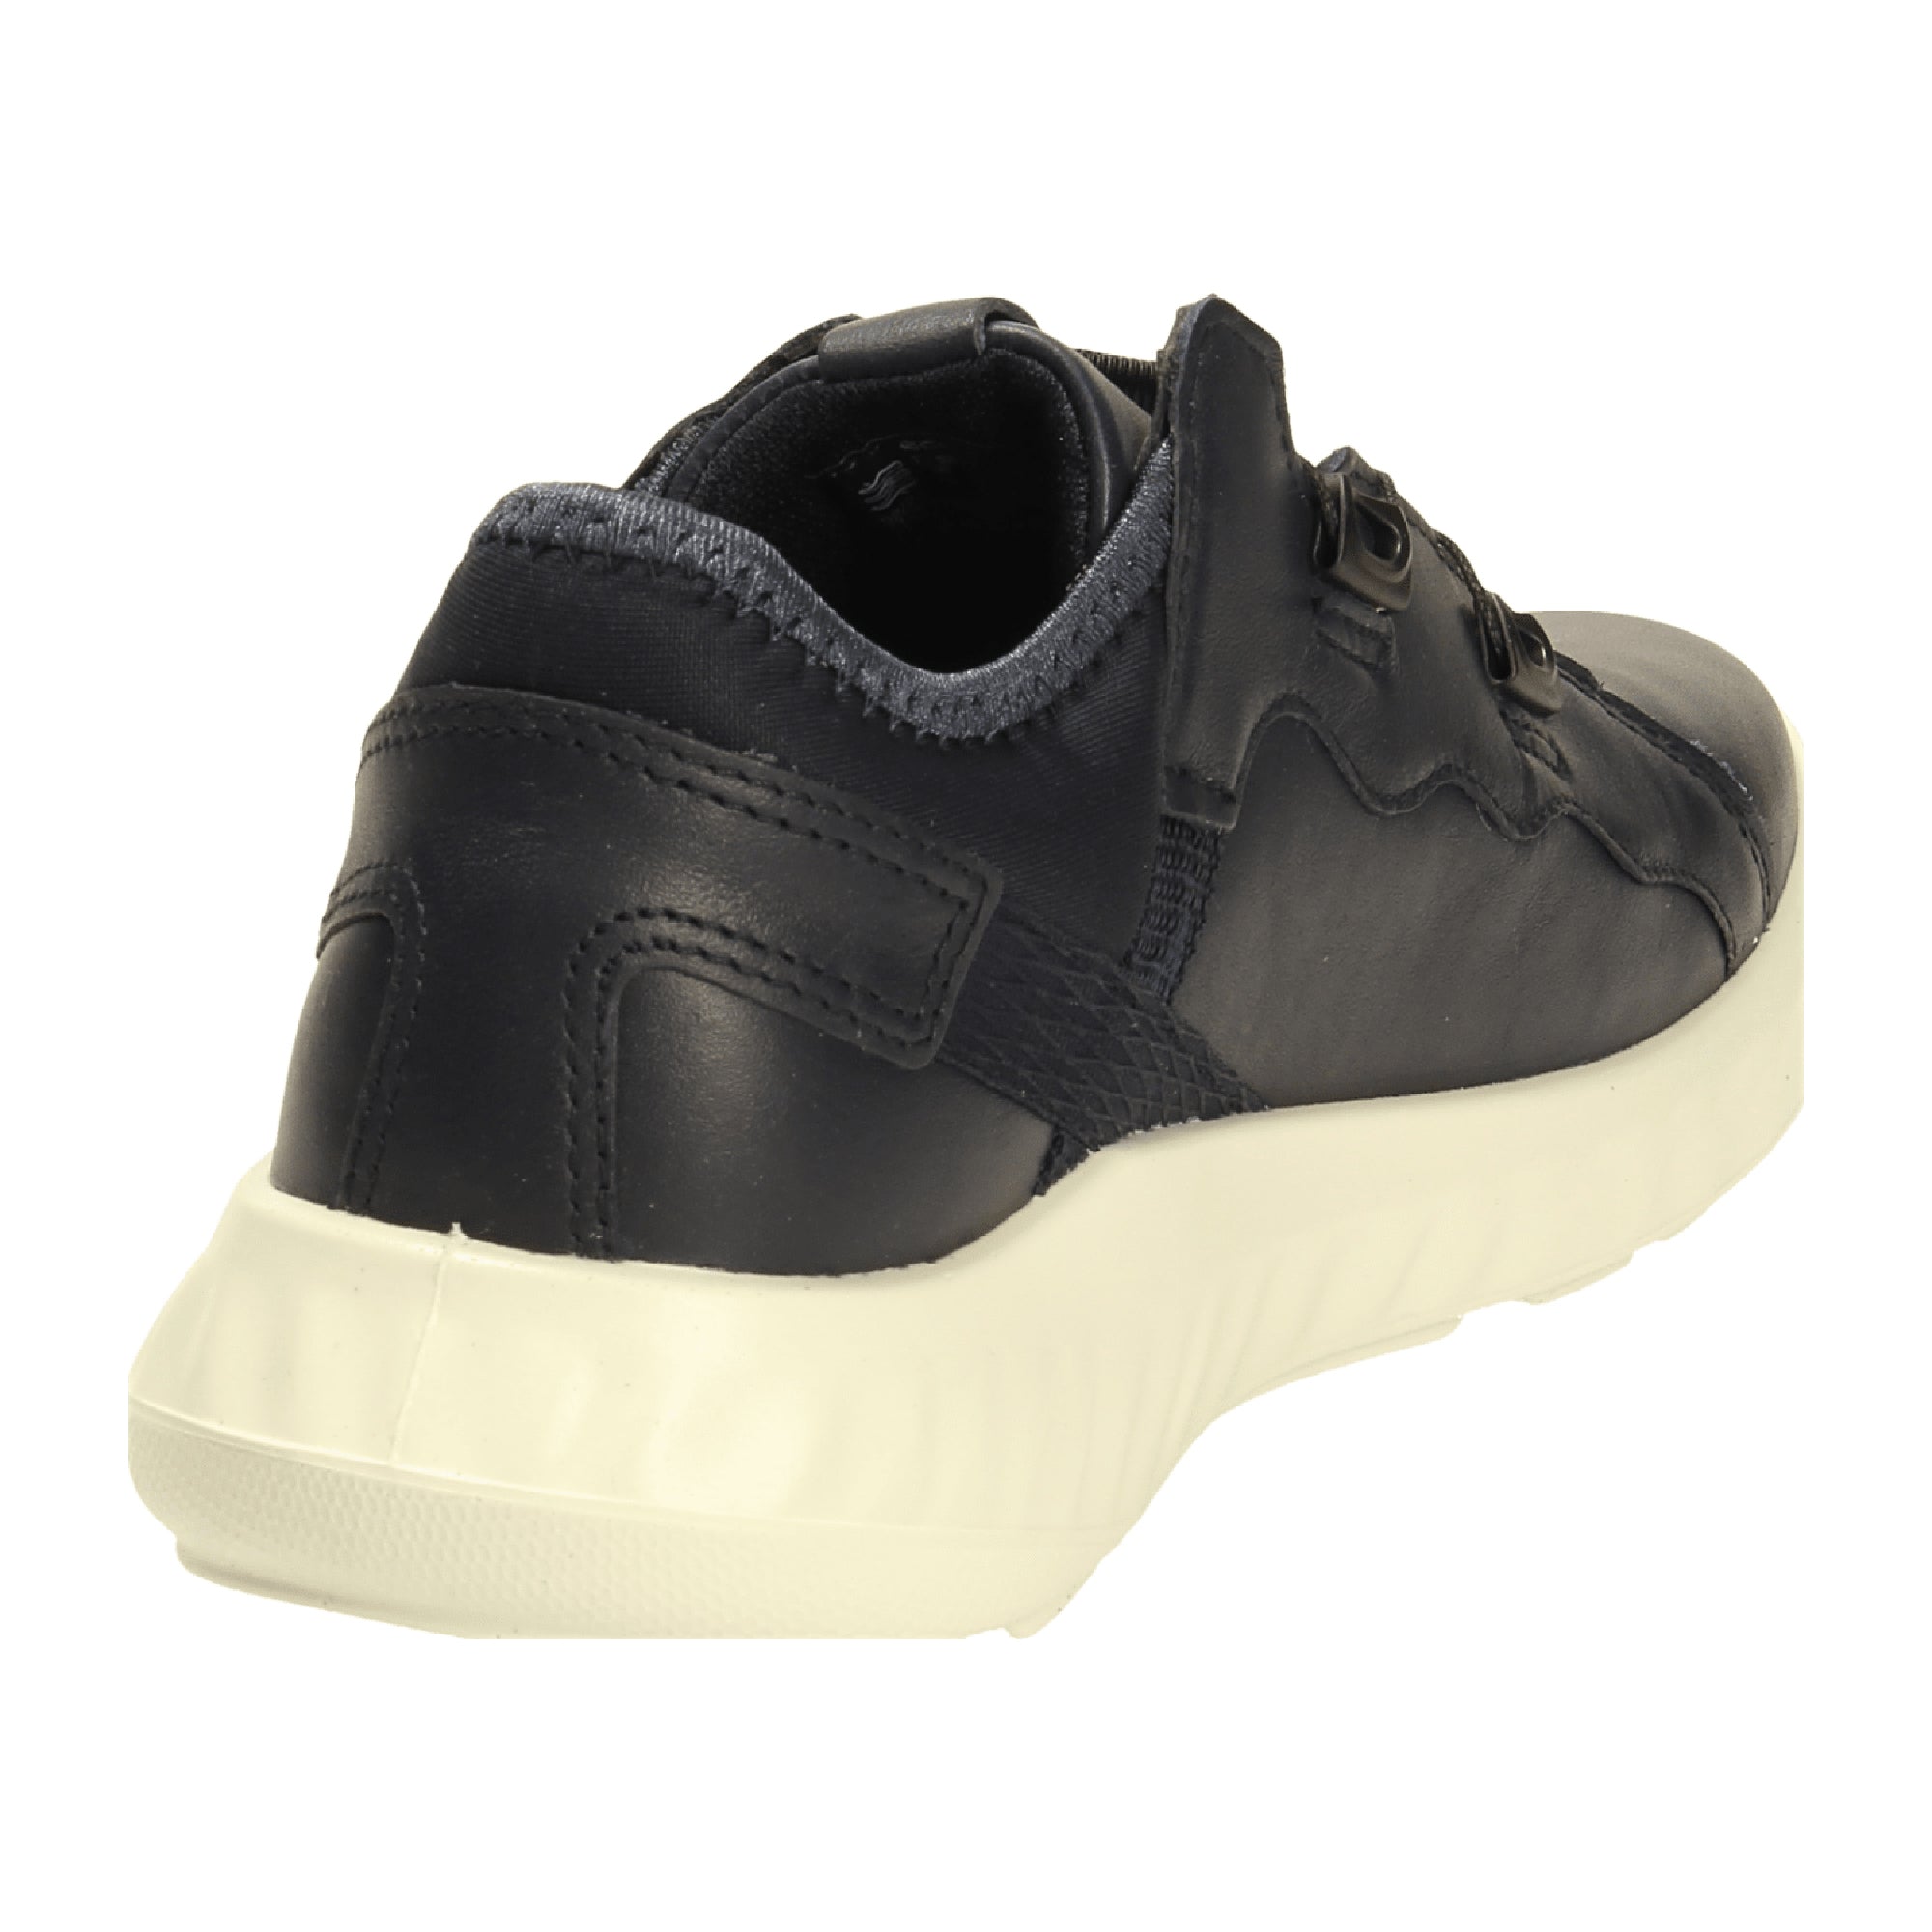 Ecco Kids Durable Blue Shoes for Children - Comfortable & Stylish